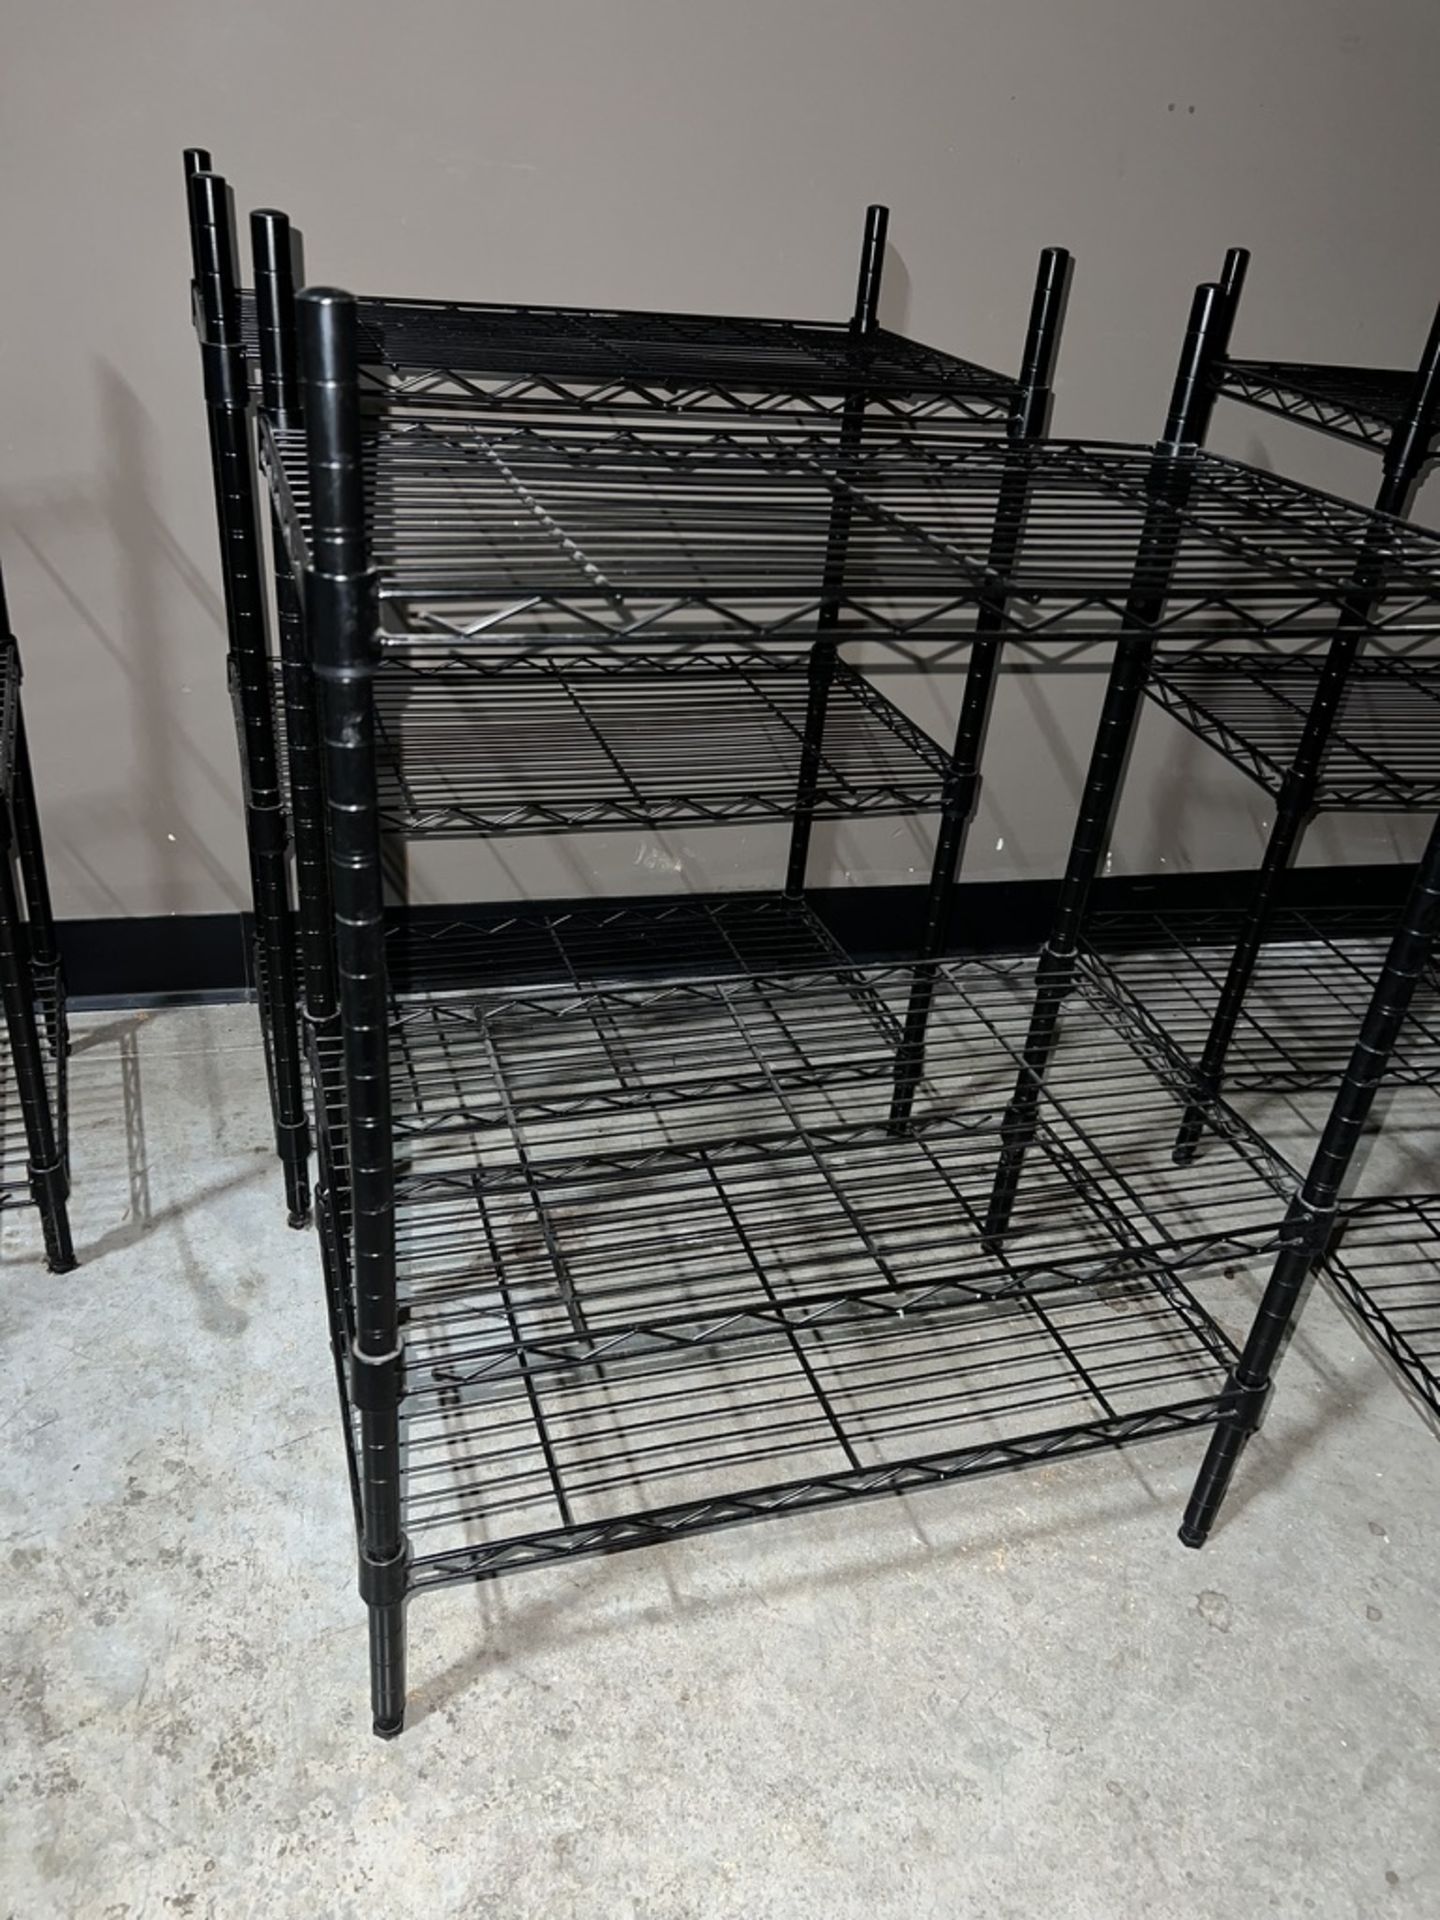 LOT OF: (2) 3-TIER WIRE SHELVING UNITS APPROXIMTELY 24" WIDE - Image 2 of 3